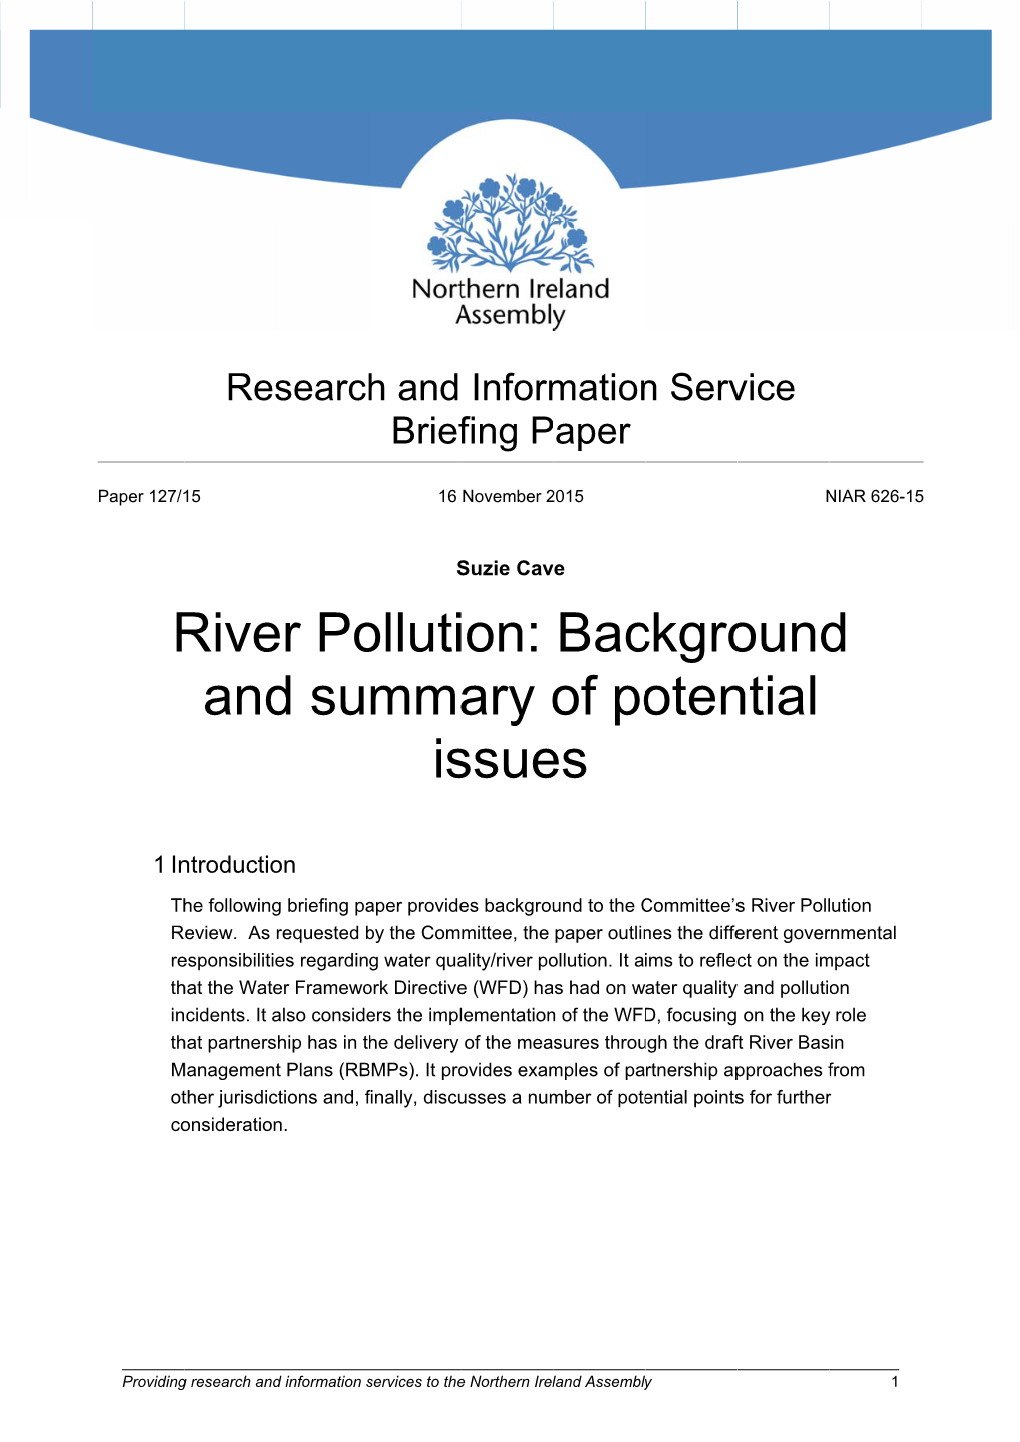 River Pollution: Background and Summary of Potential Issues